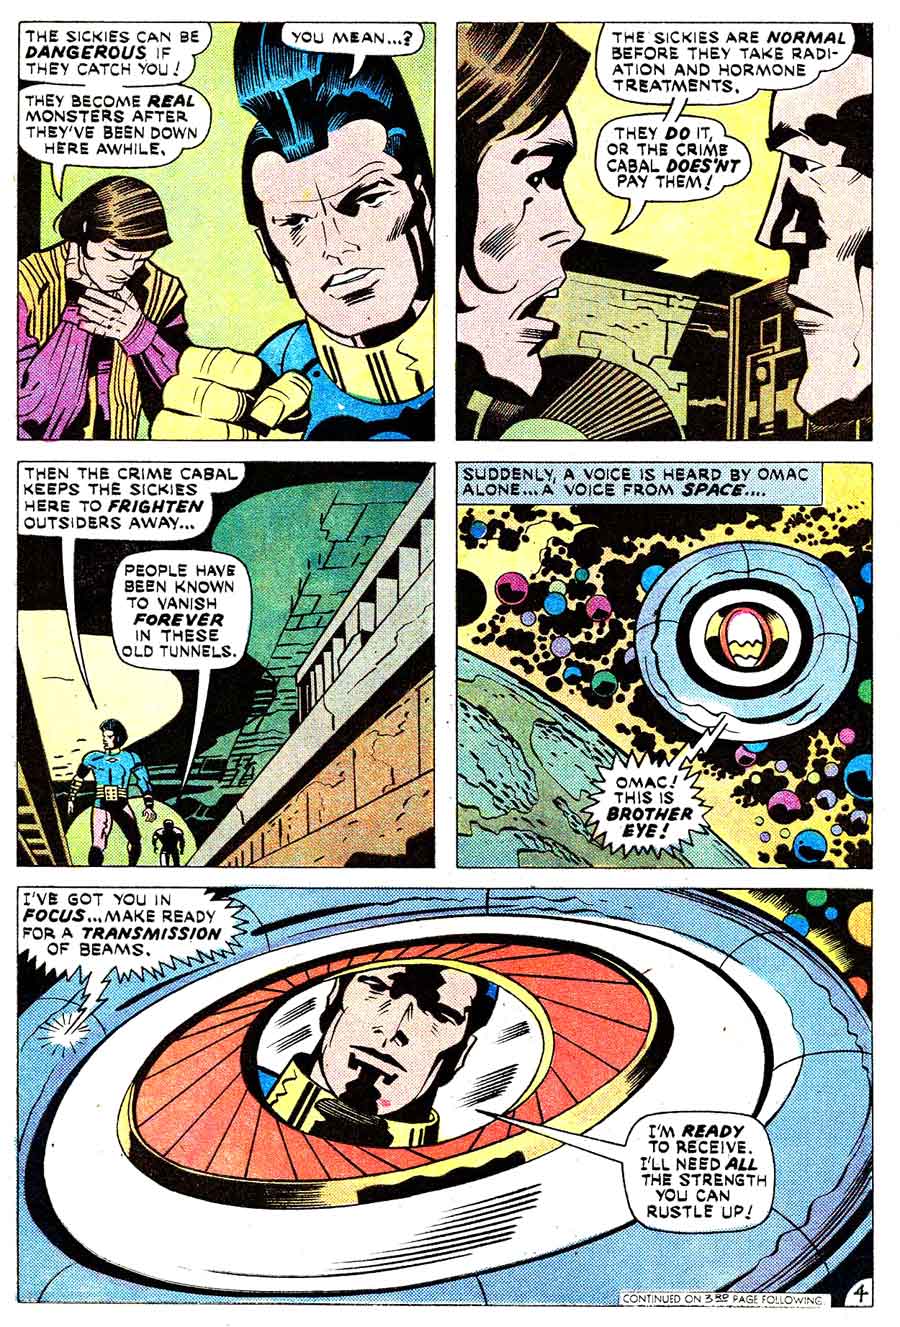 Omac v1 #6 dc bronze age comic book page art by Jack Kirby